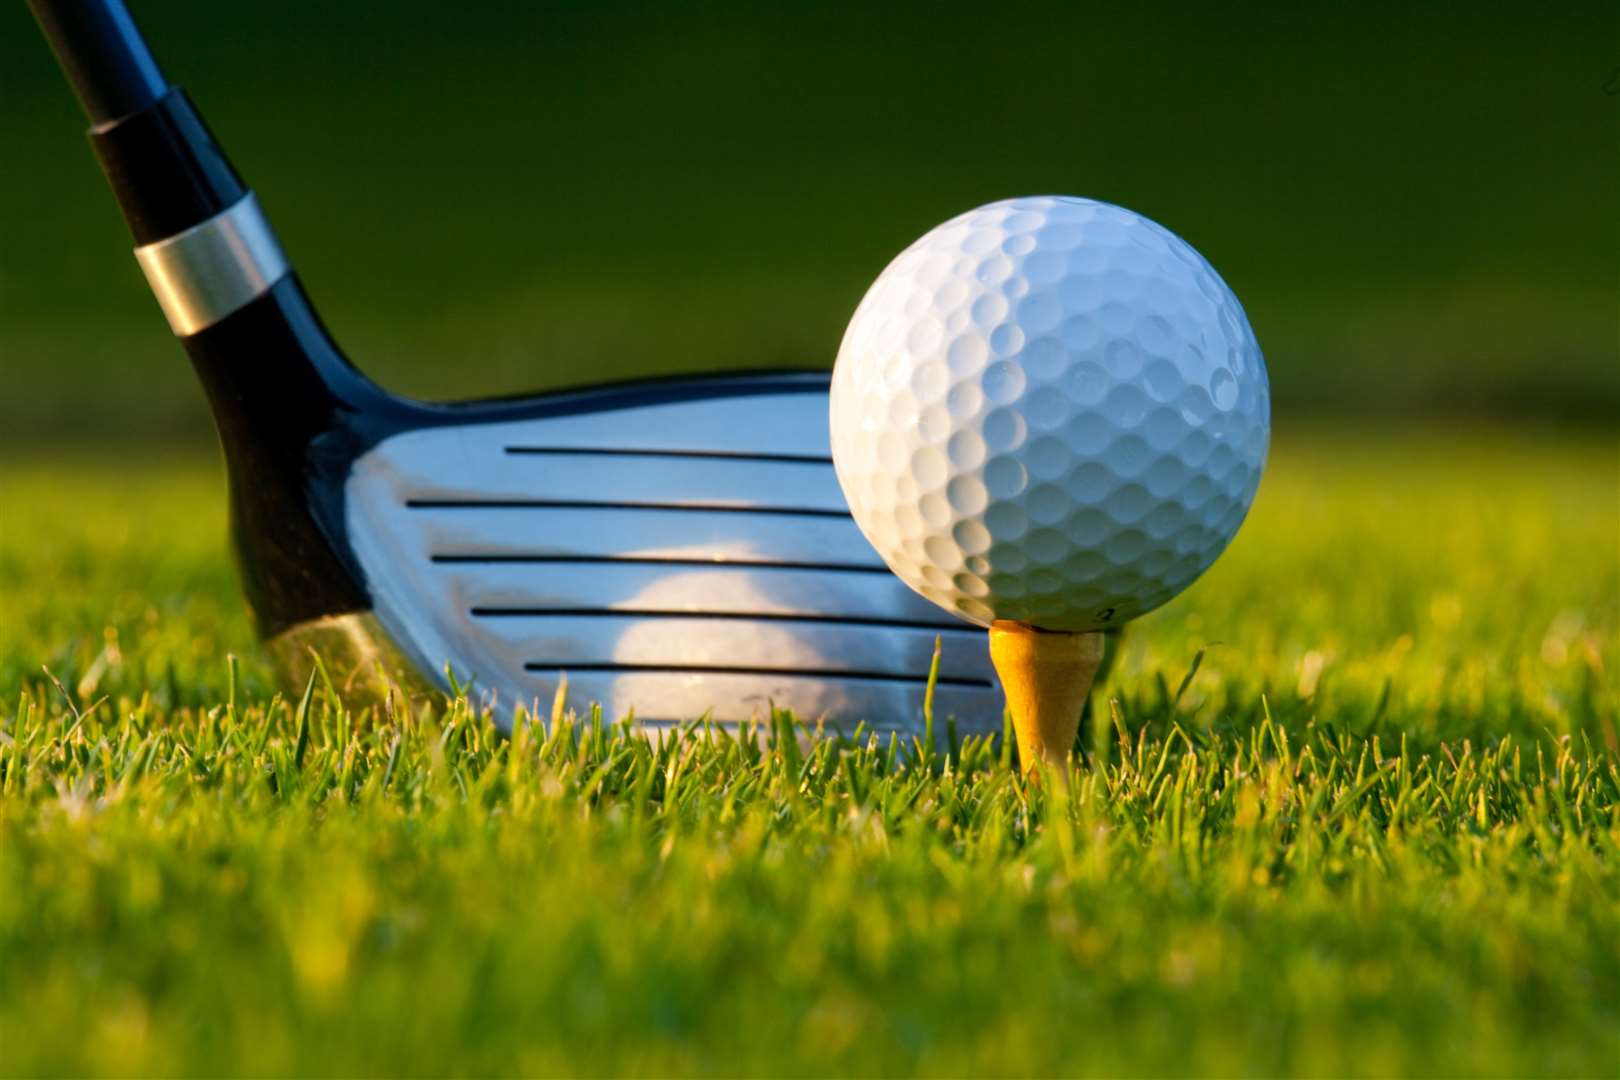 A crazy golf course could tee off at a former furniture warehouse at Lynn if planners approve. Picture: iStock